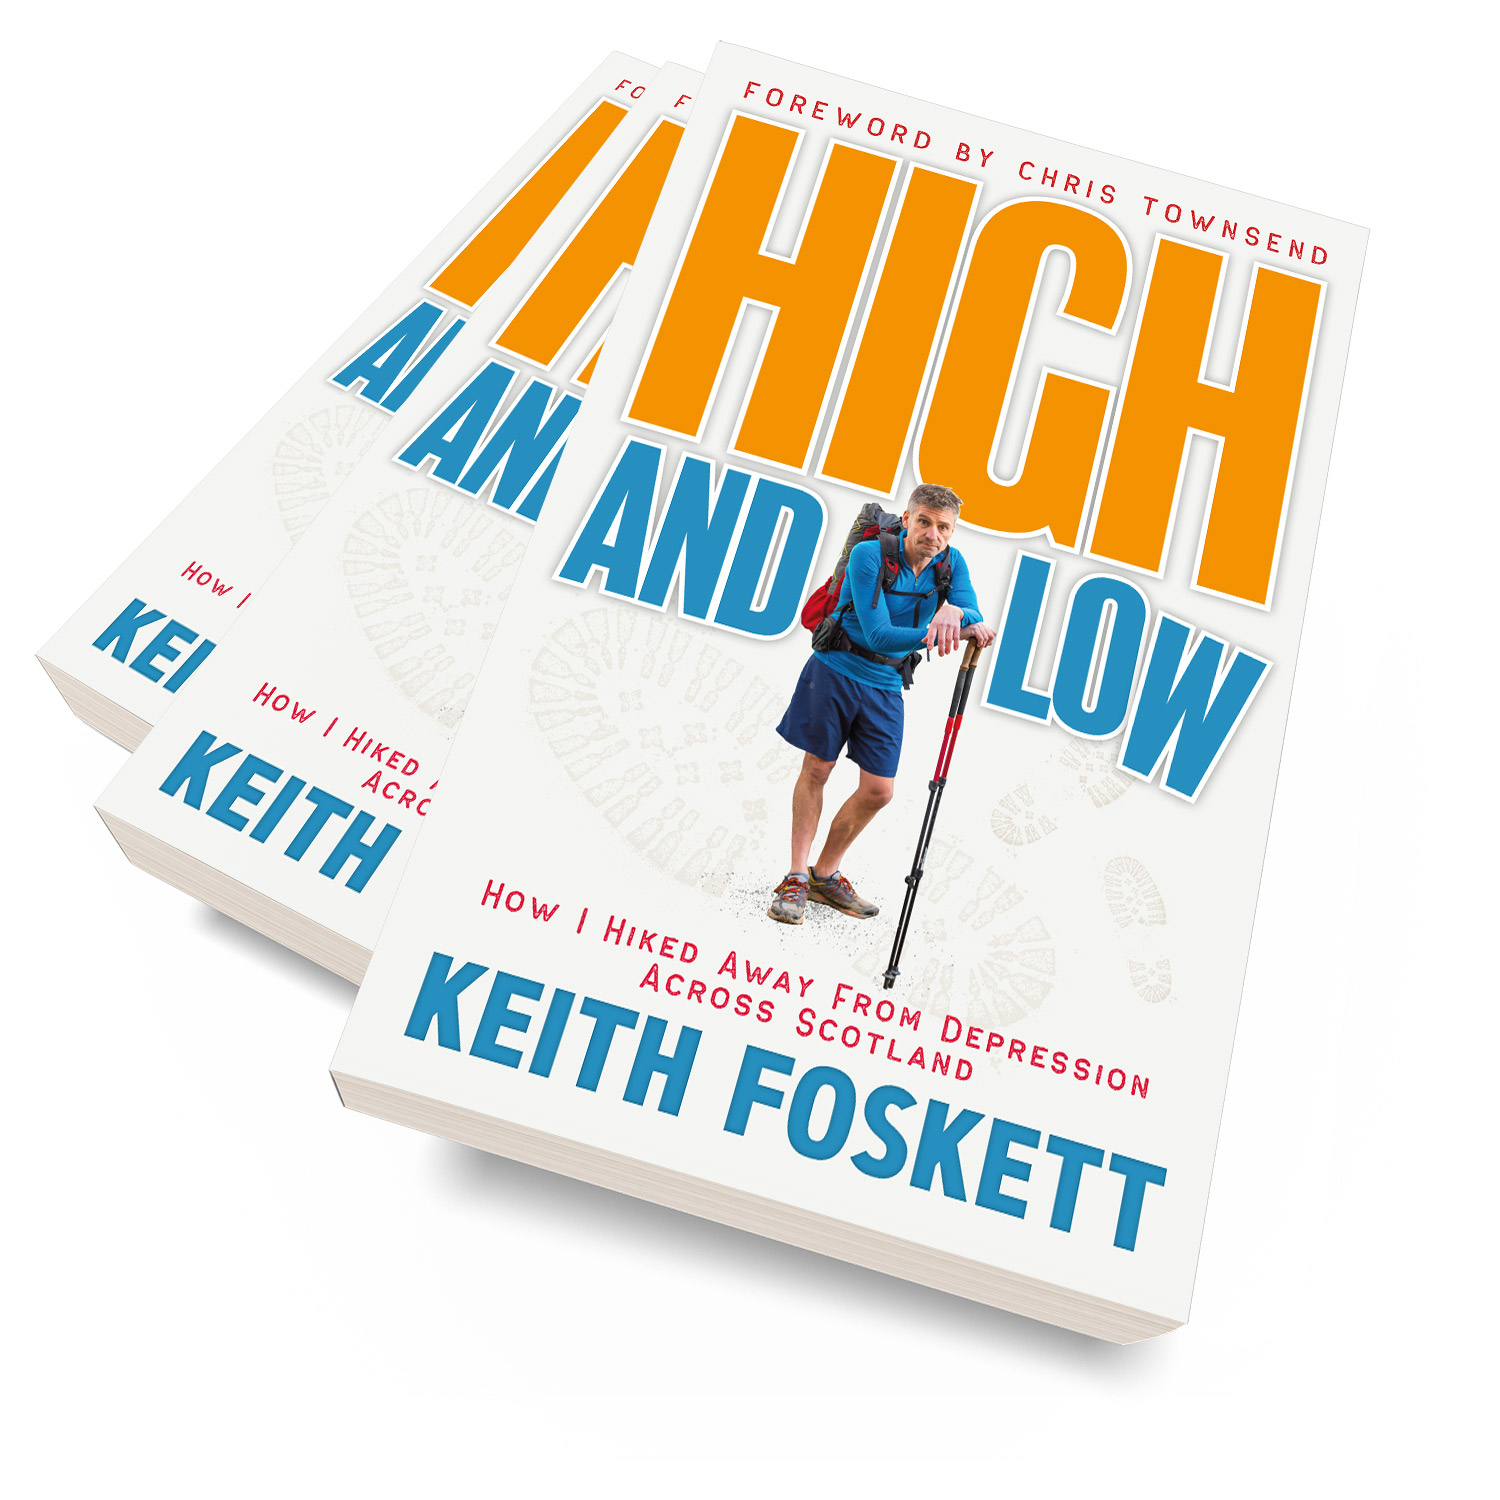 'High and Low' is a humorous and touching walking memoir, by Keith Foskett. The book cover was designed by Mark Thomas, of coverness.com. To find out more about my book design services, please visit www.coverness.com.